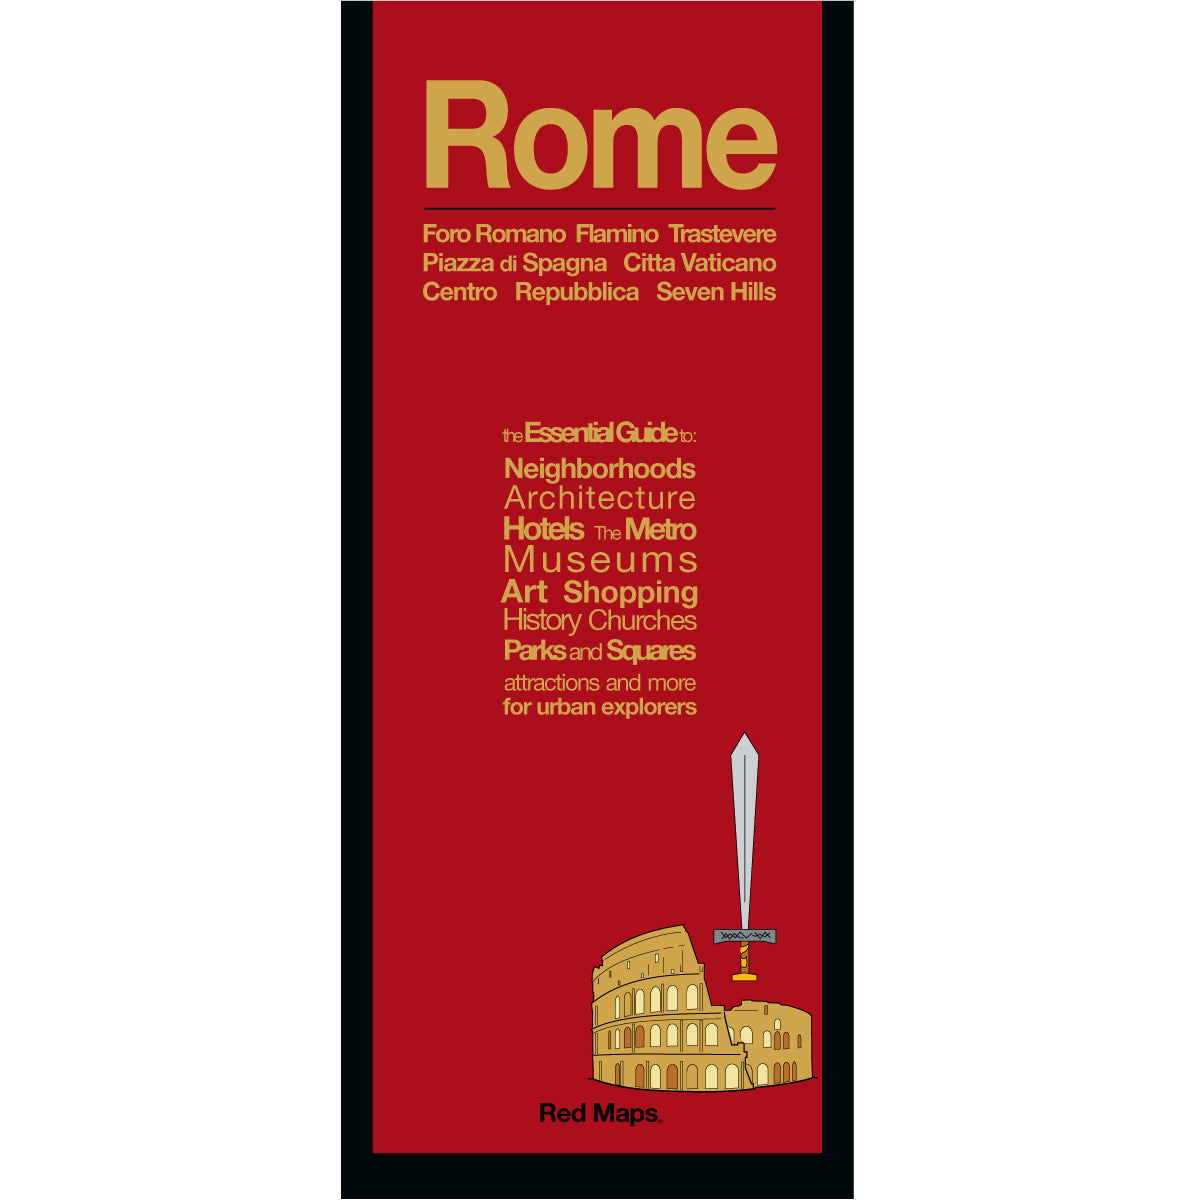 Rome city foldout map with a red colored cover.